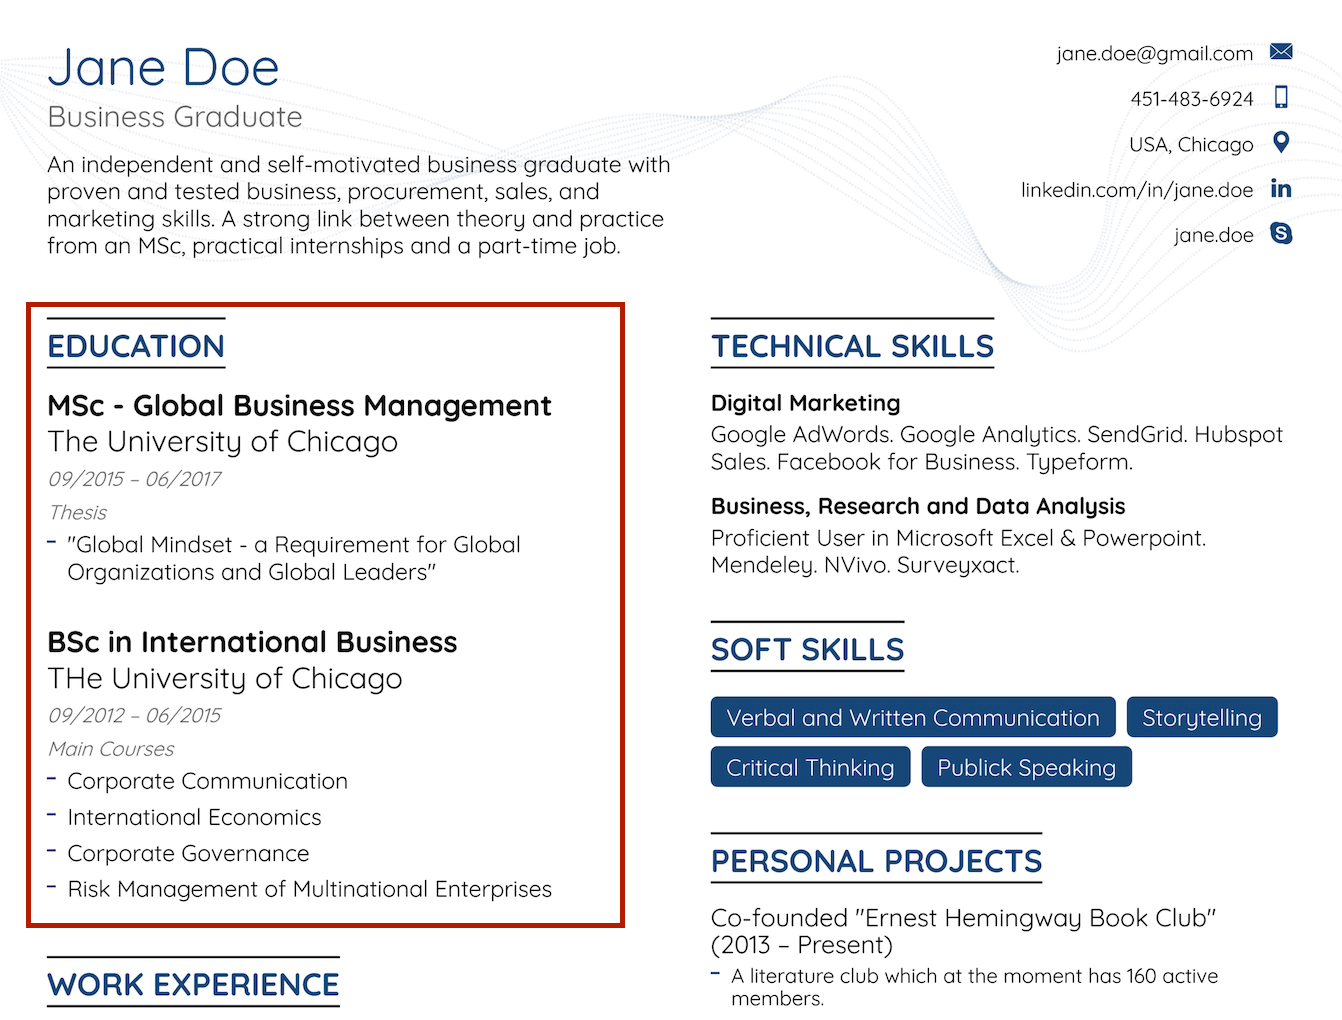 education section on resume no experience